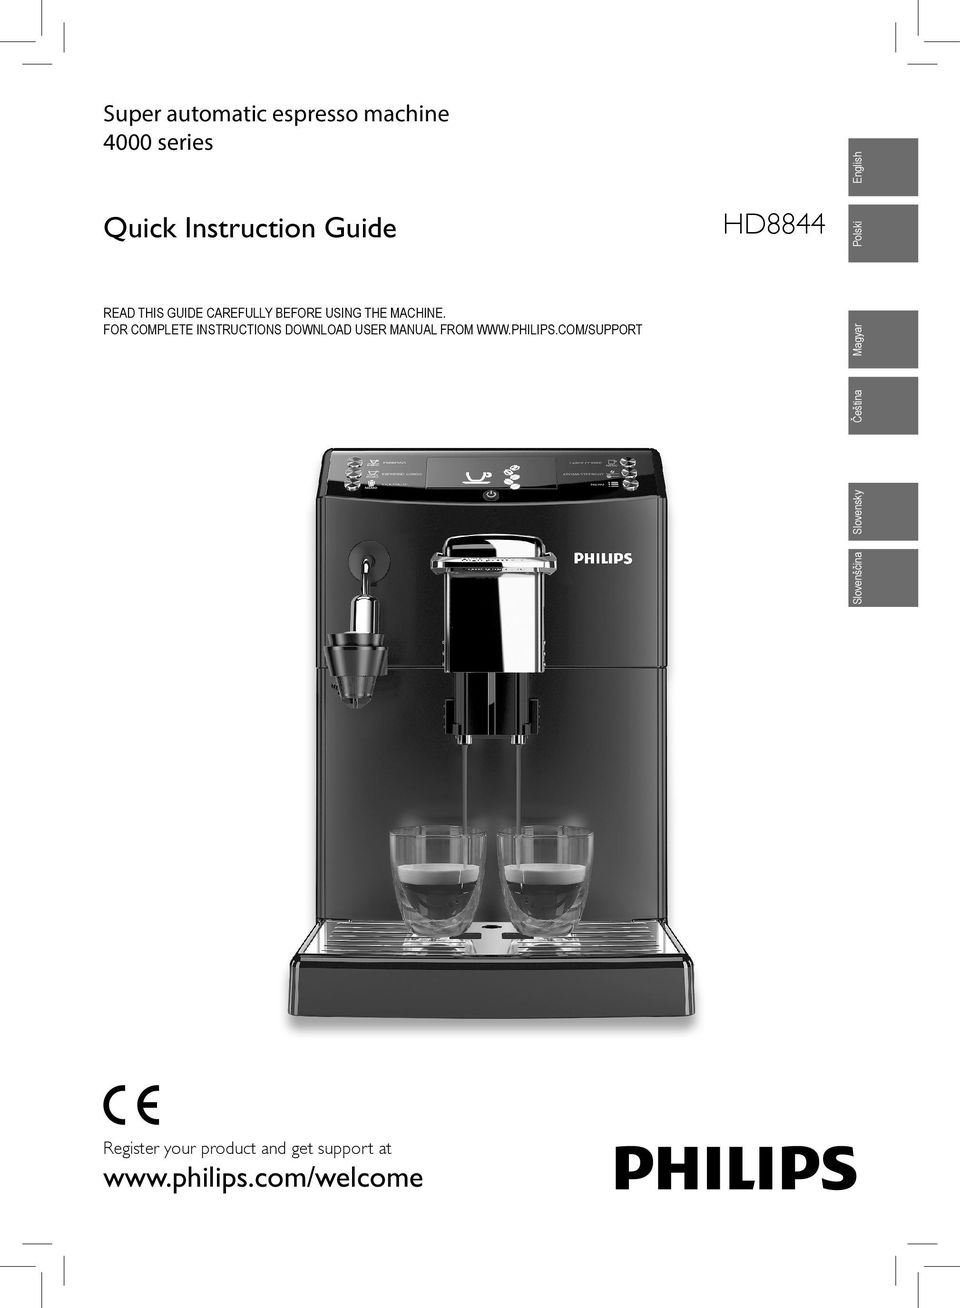 FOR COMETE INSTRUCTIONS DOWNLOAD USER MANUAL FROM WWW.PHILIPS.